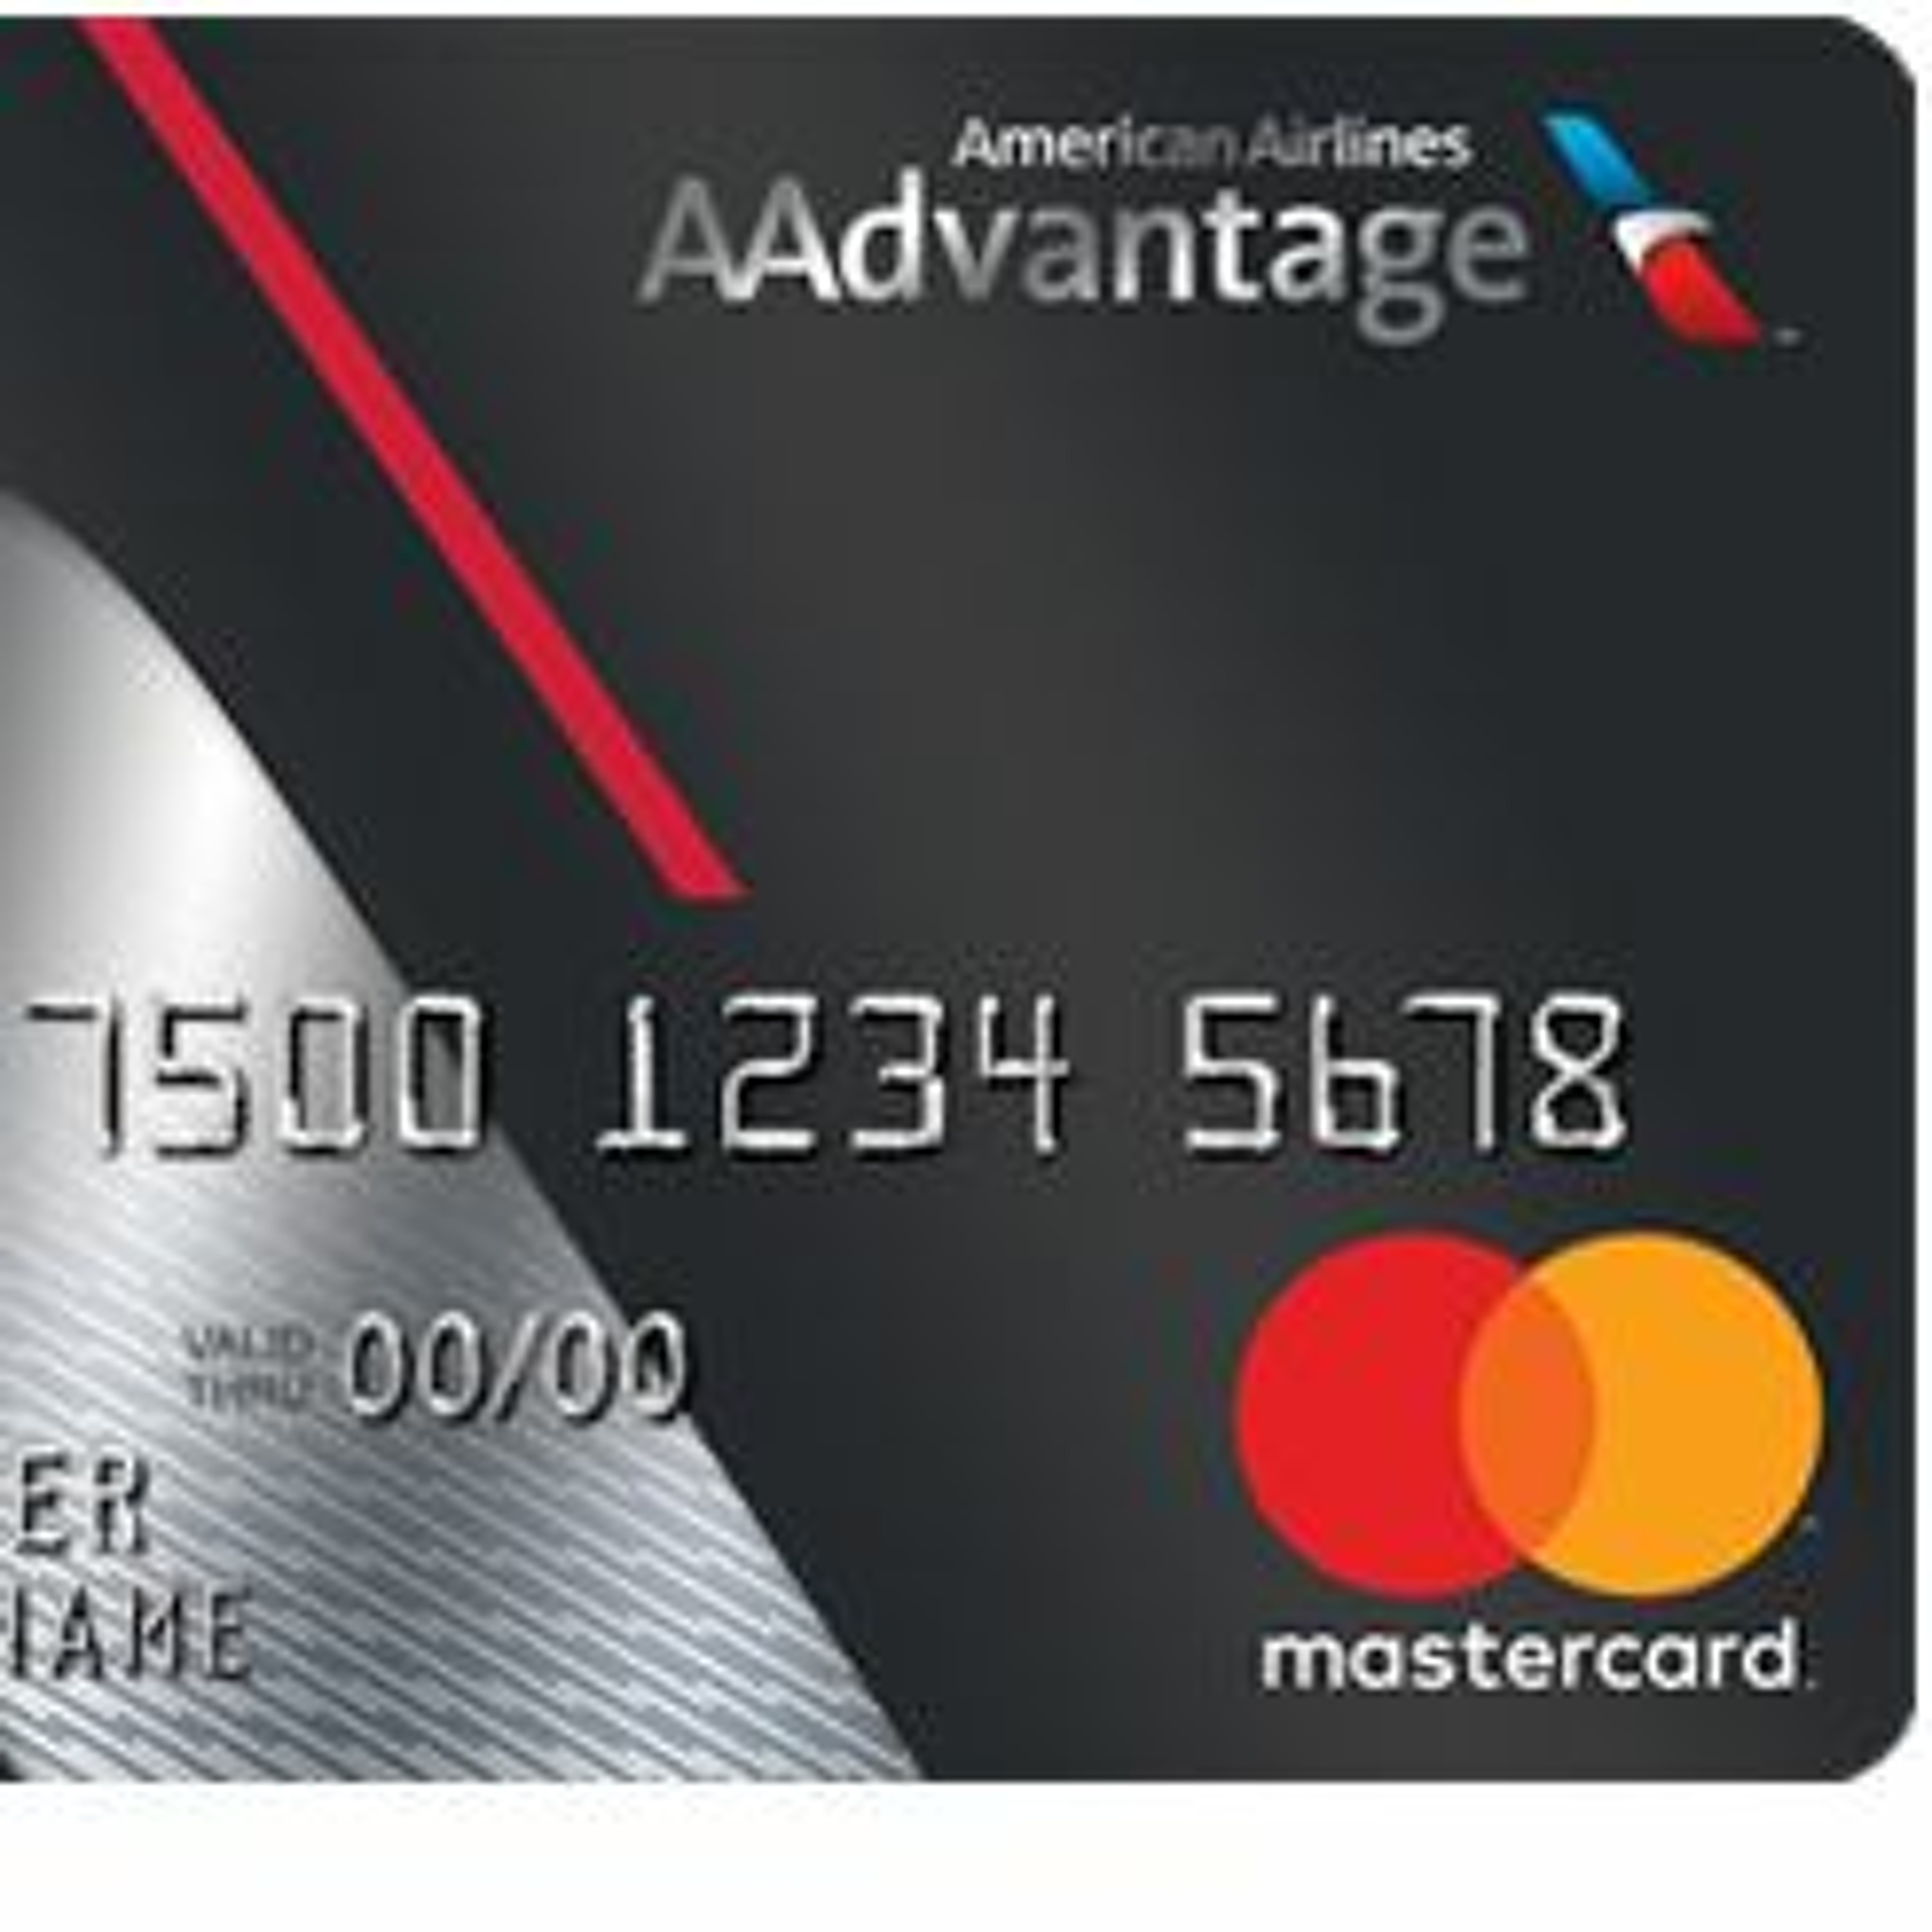 47: Barclays AAdvantage Aviator Business Credit Card Review